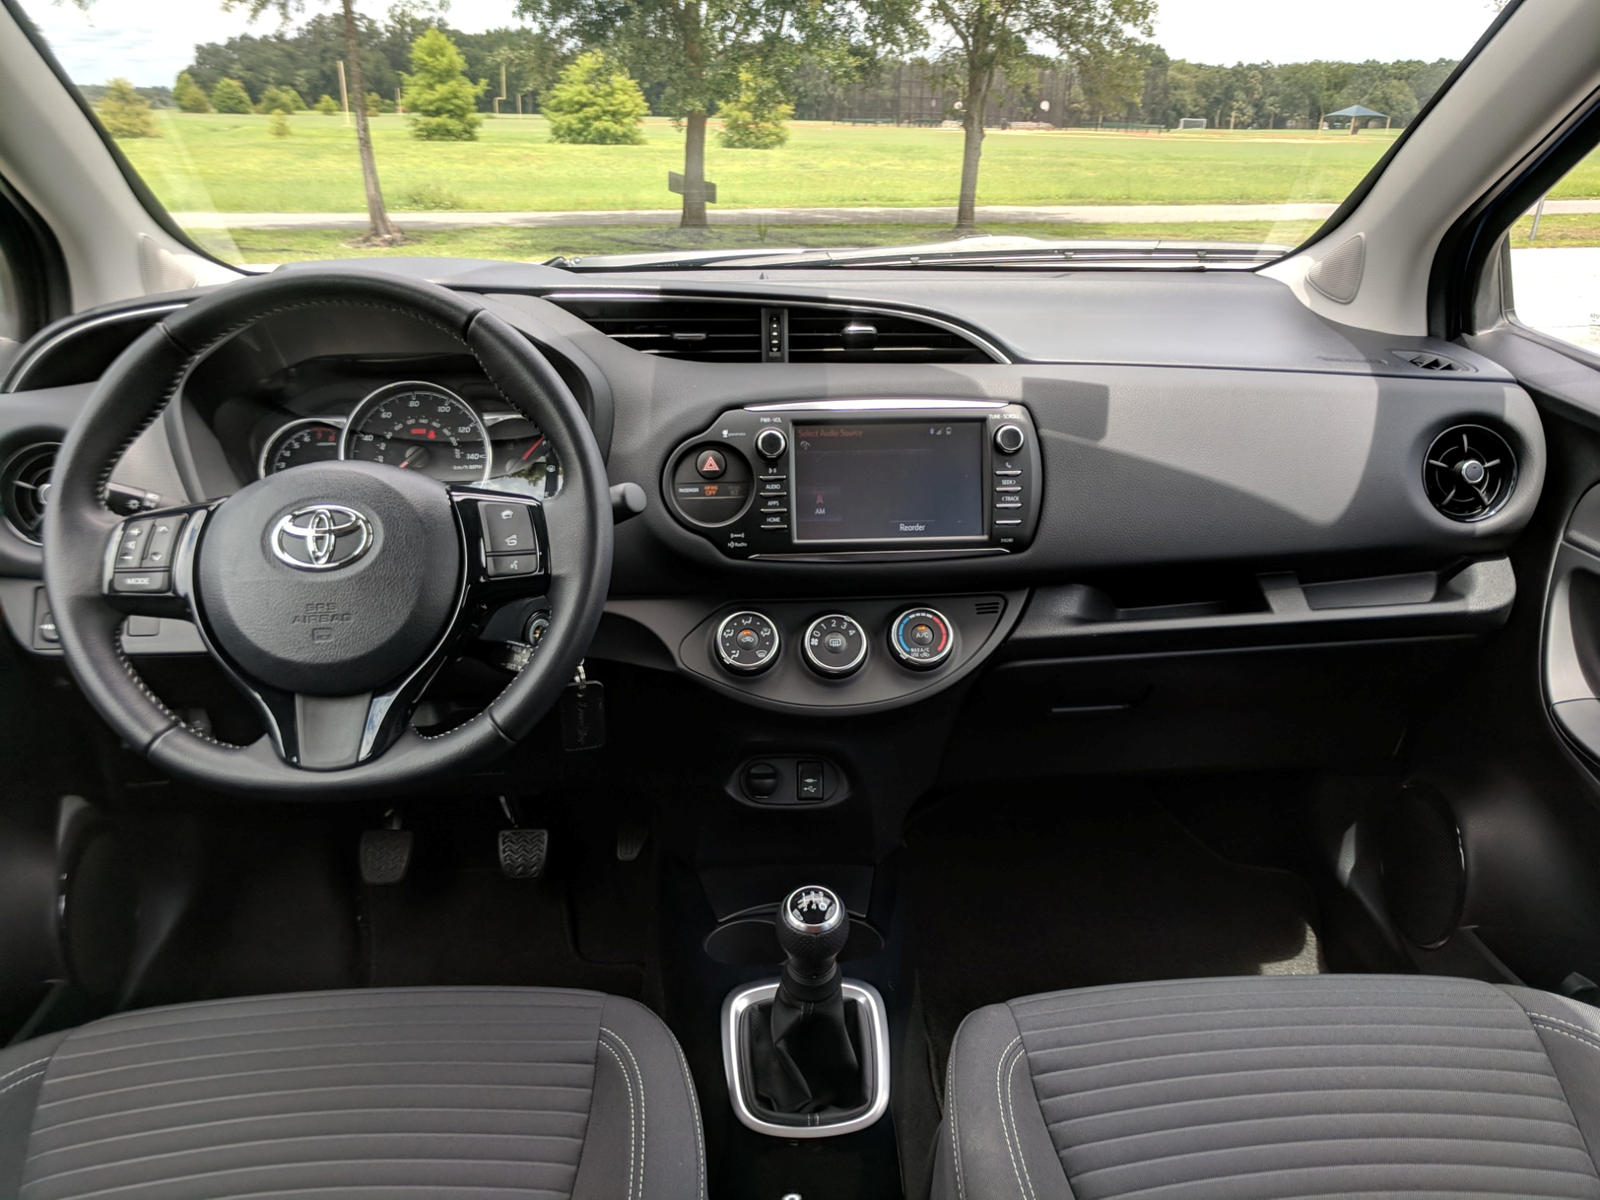 2018 Toyota Yaris Hatchback: Review, Trims, Specs, Price, New